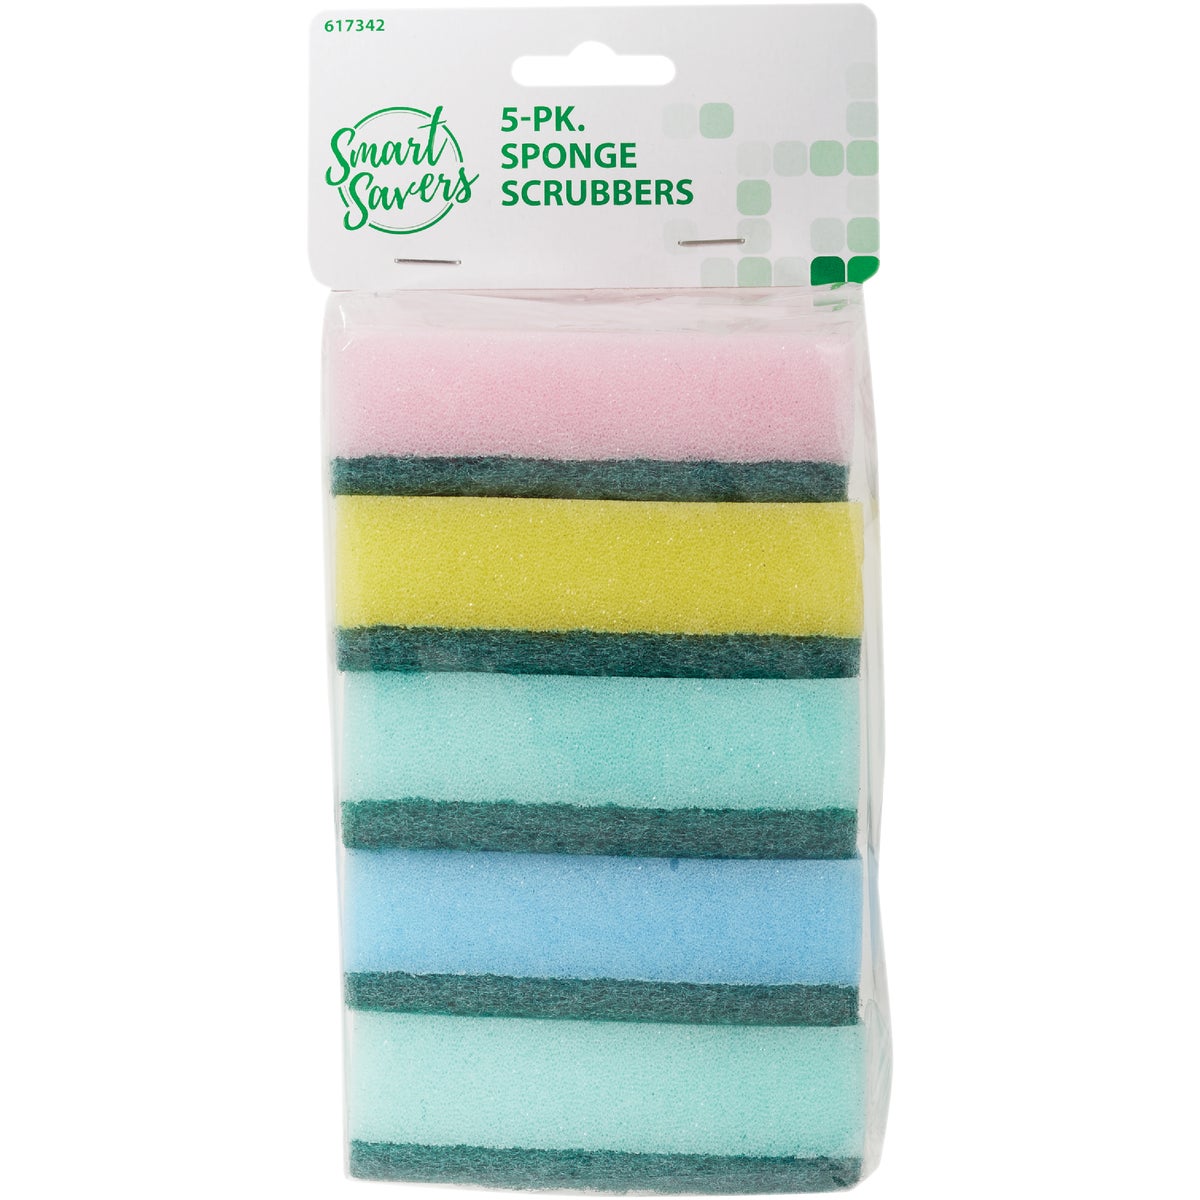 Item 617342, Smart Savers 5-piece sponge scrubbers is ideal for general cleaning.